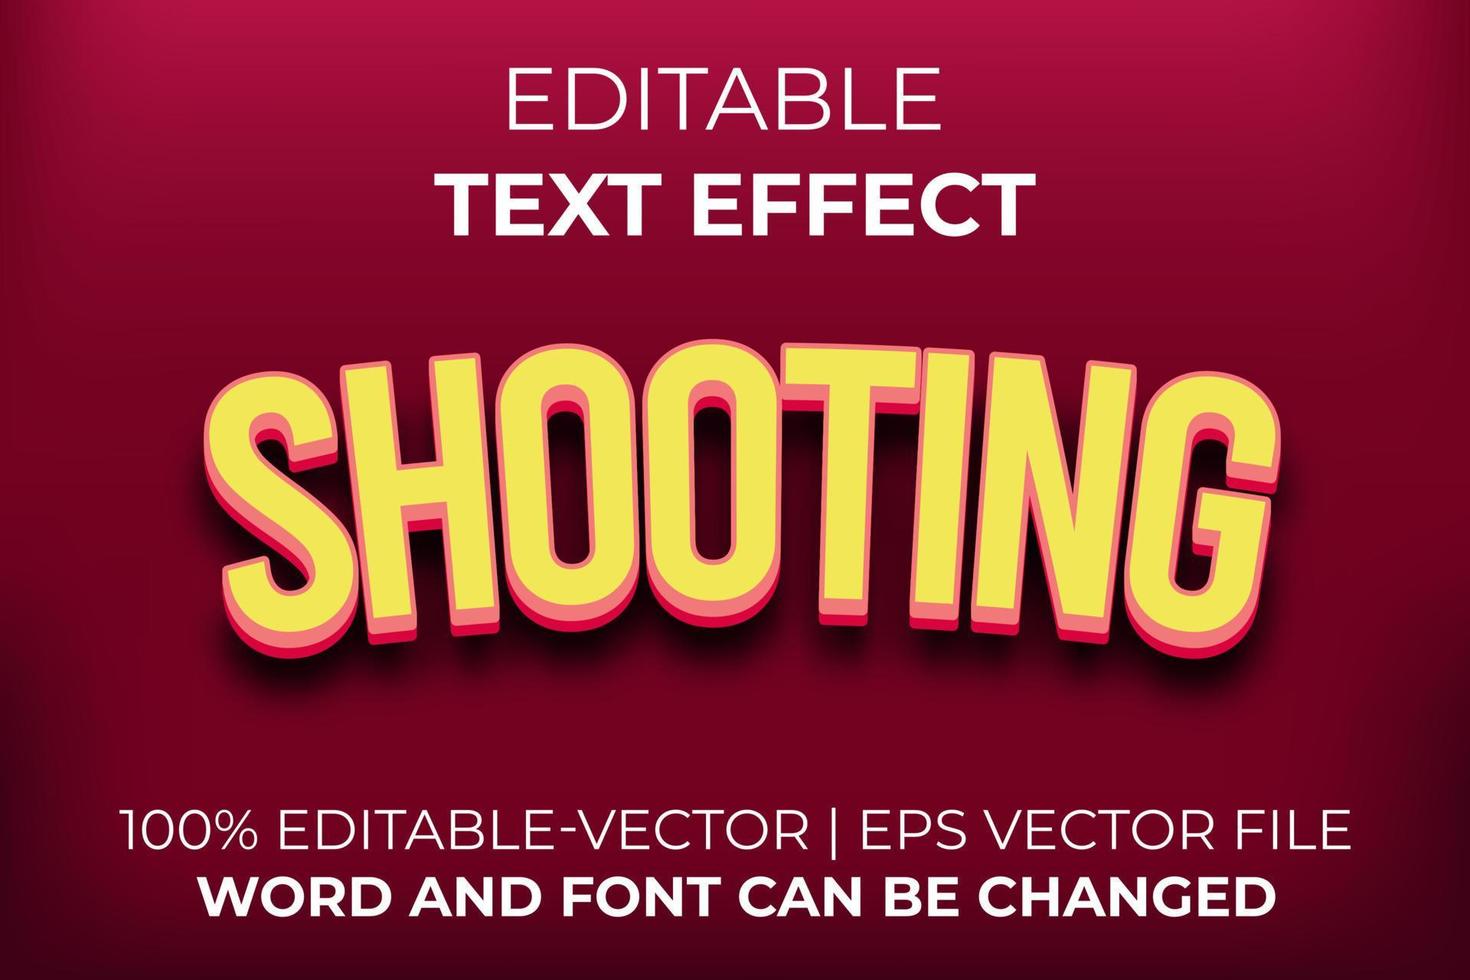 Shooting text effect, easy to edit vector